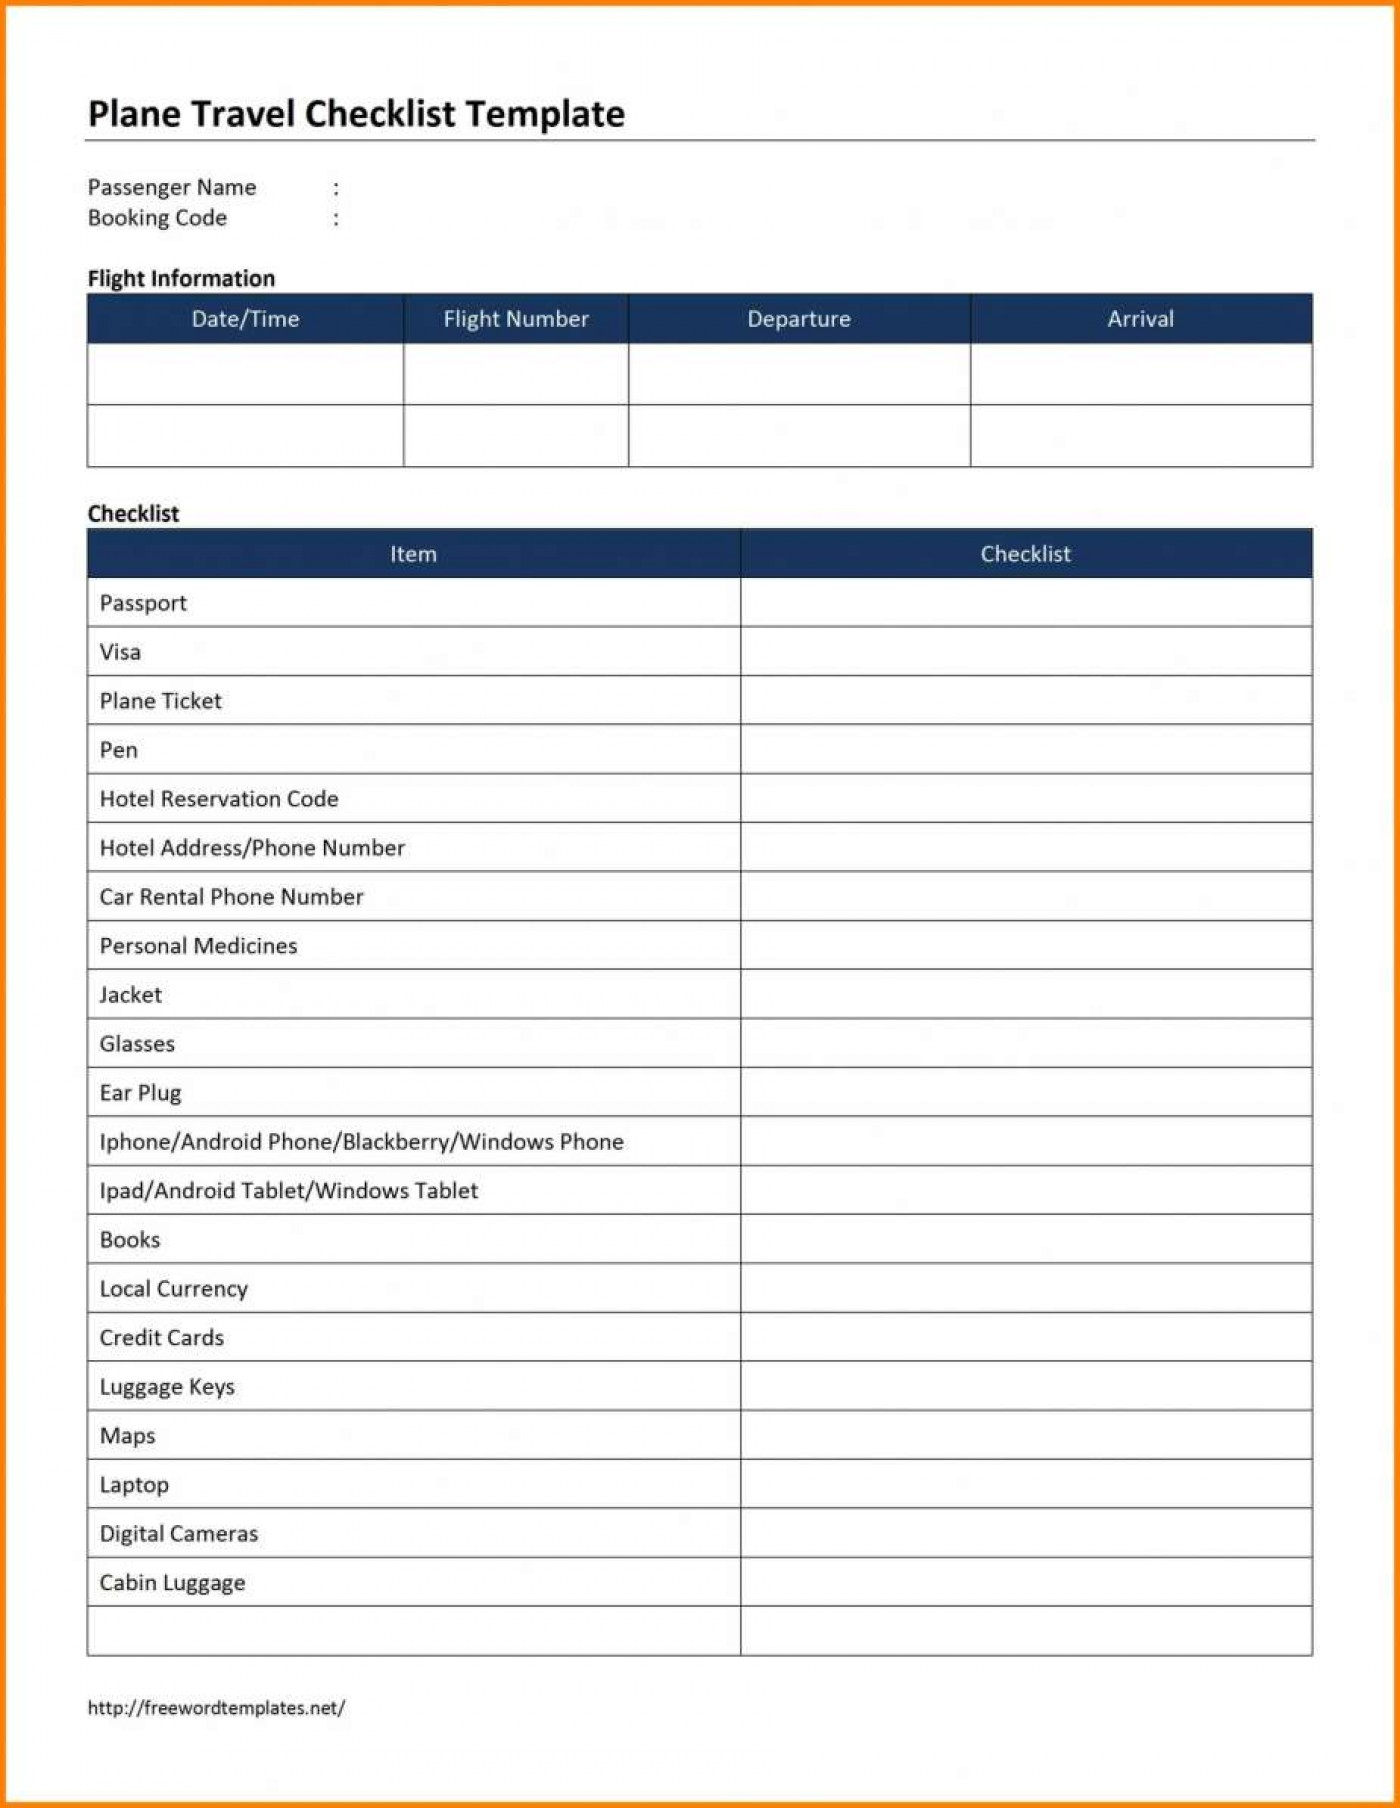 Startup Expenses Spreadsheet Regarding 010 Template Ideas Cleaning Business Start Up Cost Oxynuxorg Startup